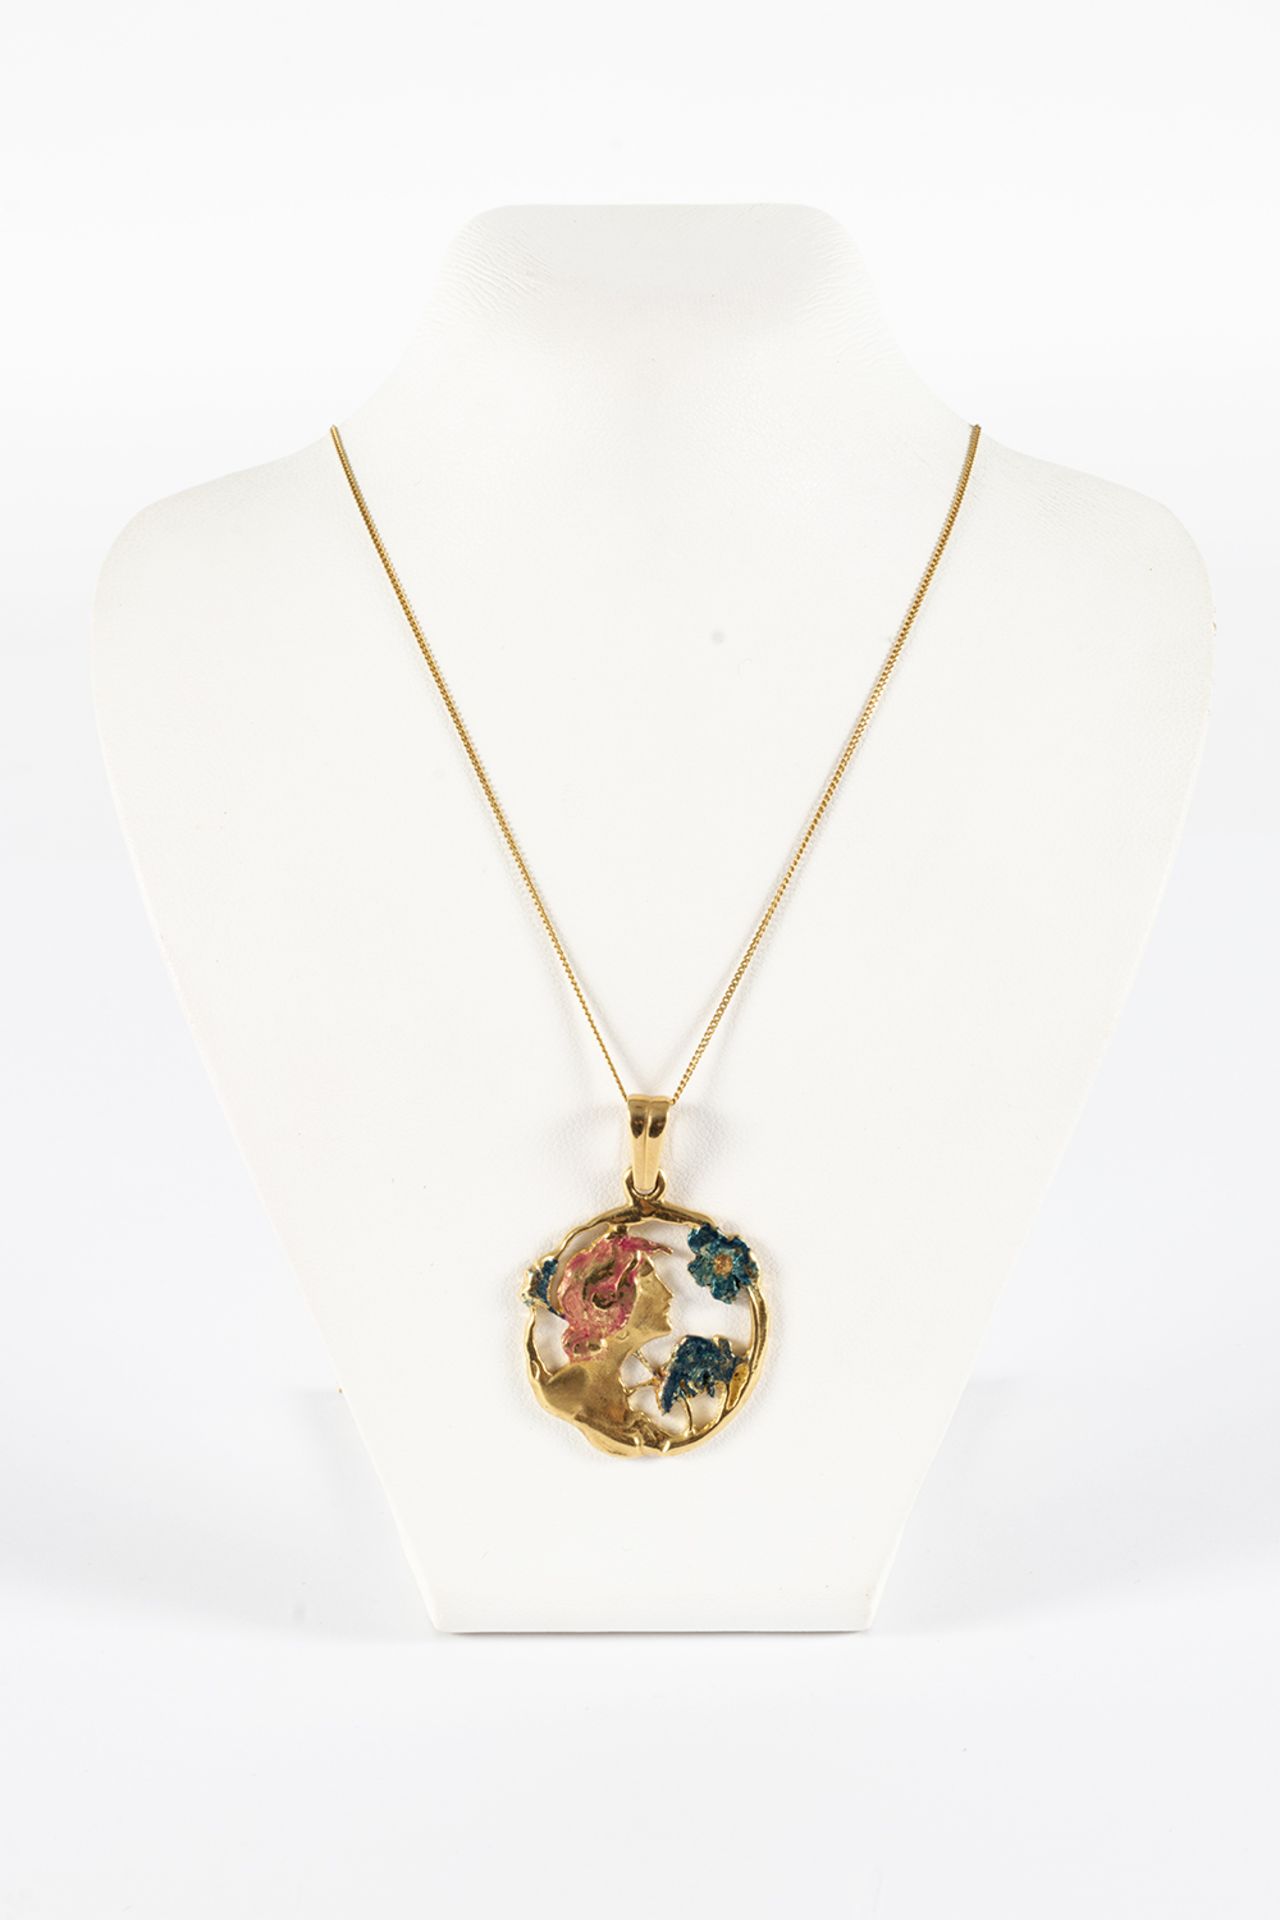 Art Nouveau style pendant in gold and enamel with a female figure, with chain. Gold weight.